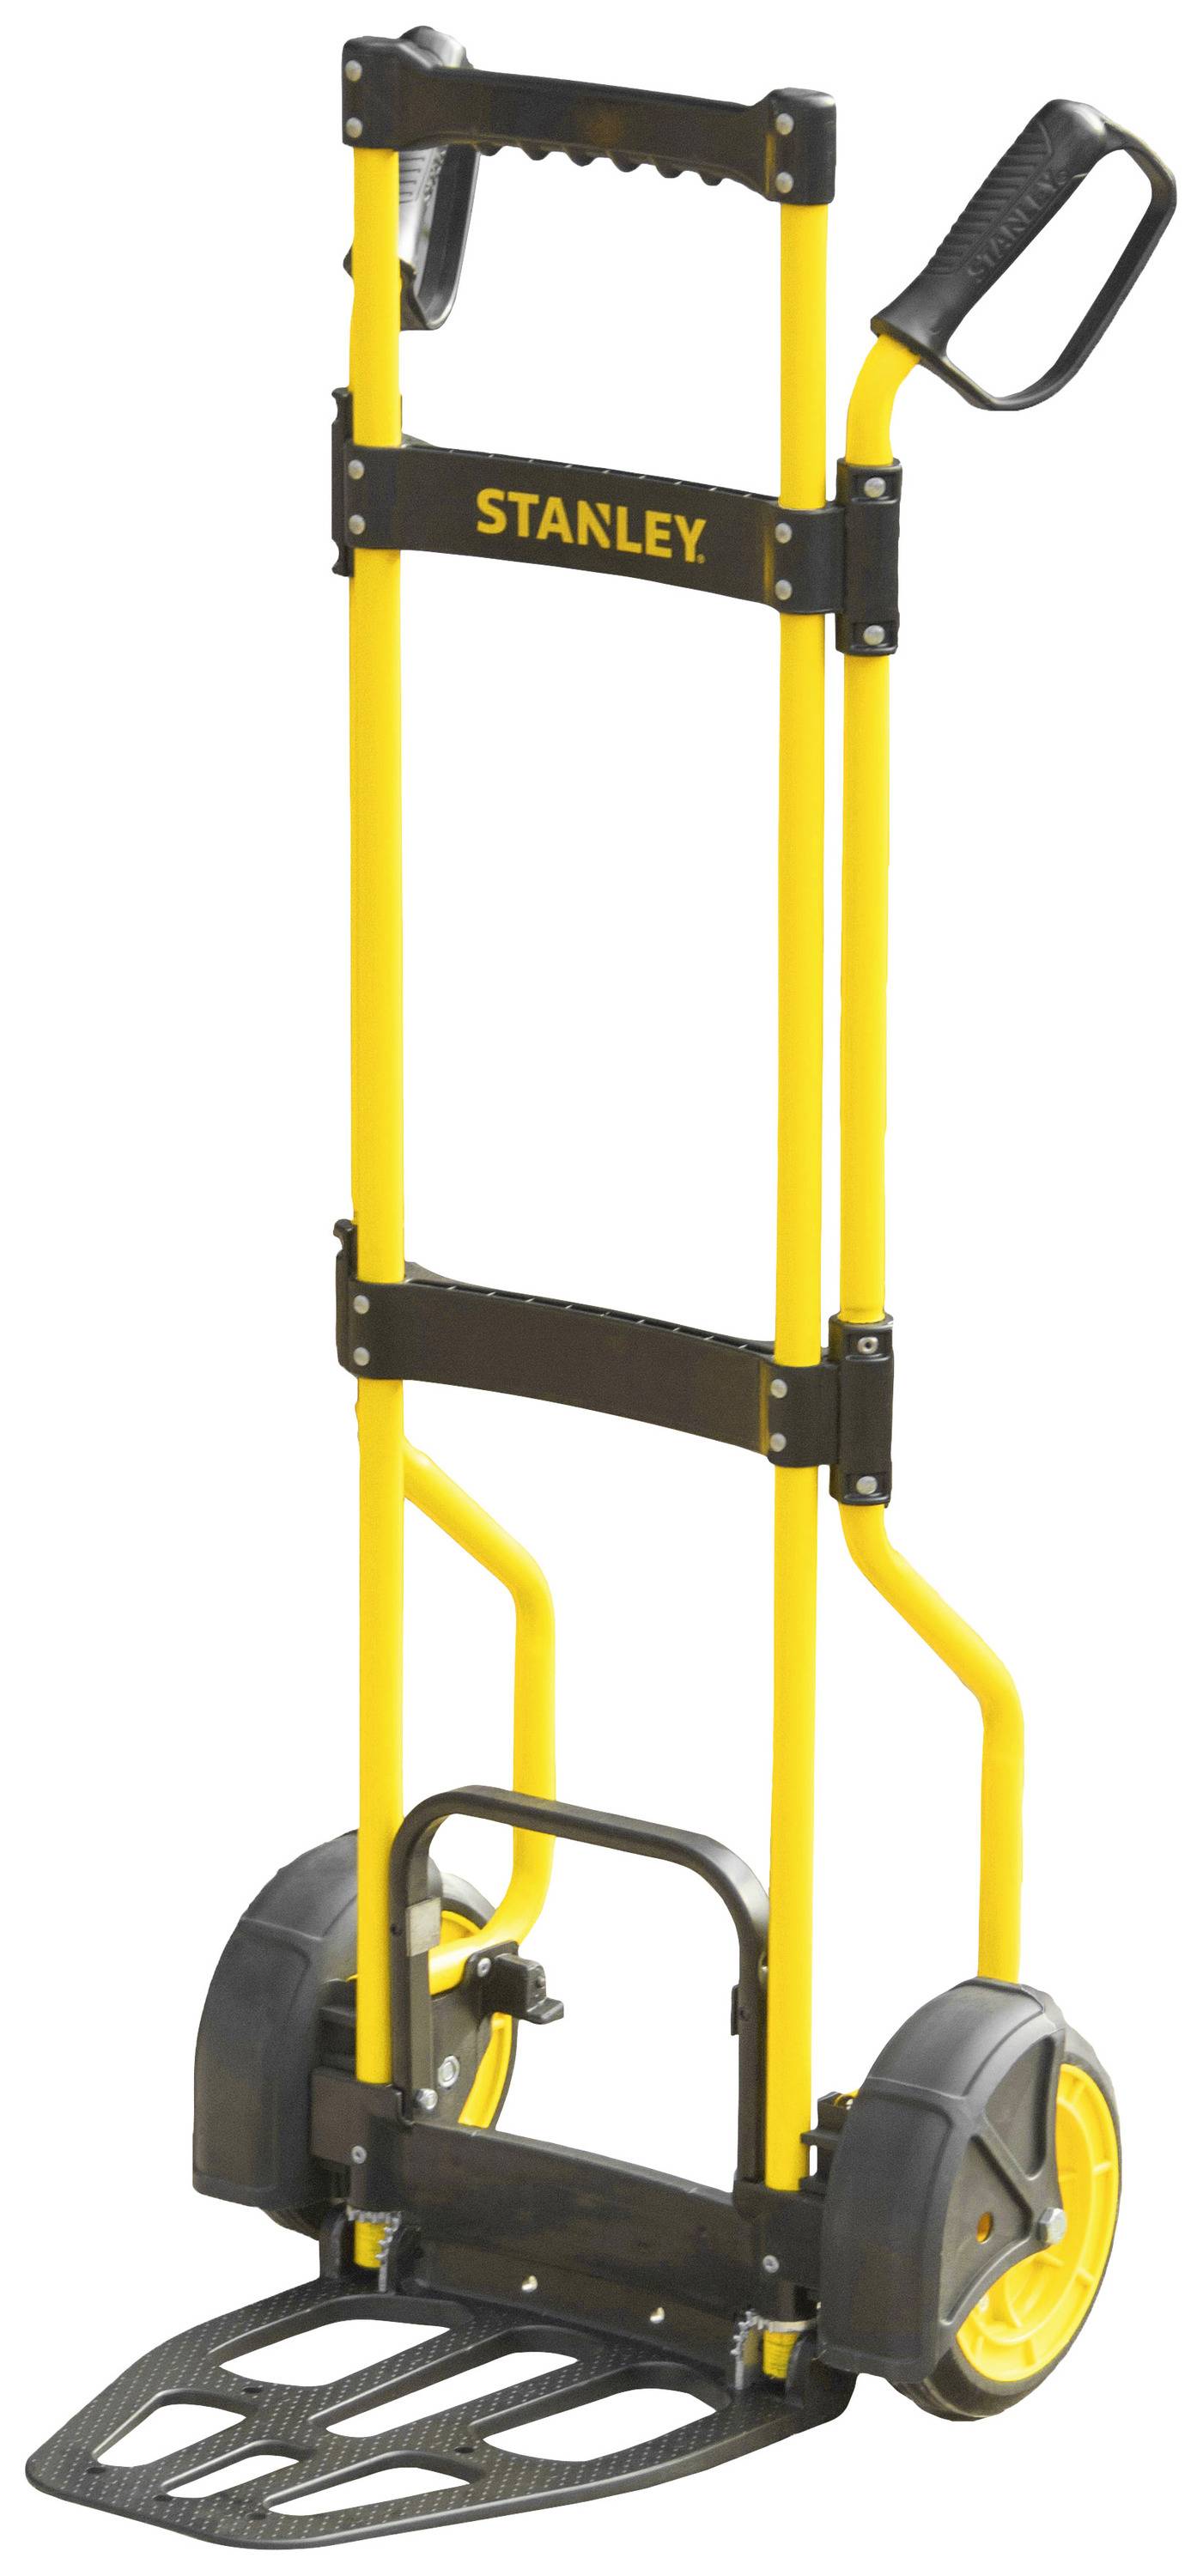 STANLEY STANLEY FT-591 HAND TRUCK 270 kg SXWTD-FT591 Diable pliable Charge  max: 270 kg - Conrad Electronic France